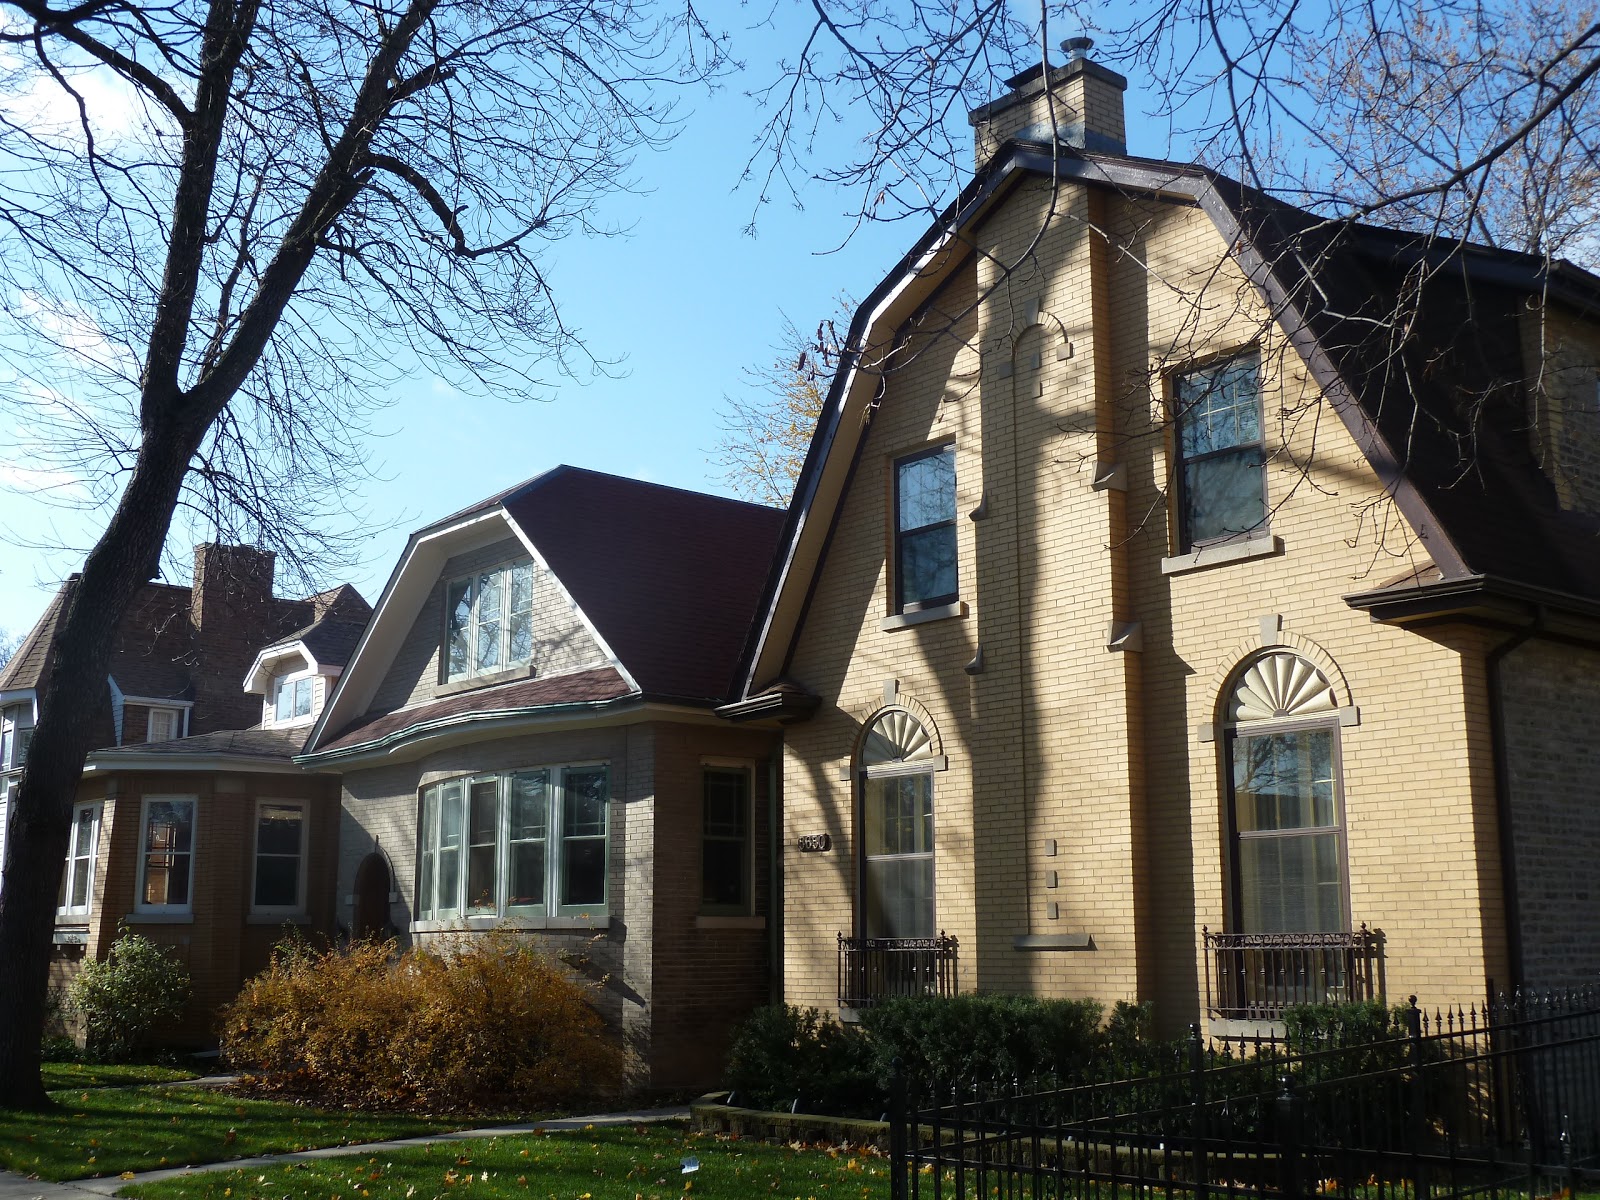 The Chicago Real Estate Local: Home sales, photos in Peterson Woods neighborhood of Chicago